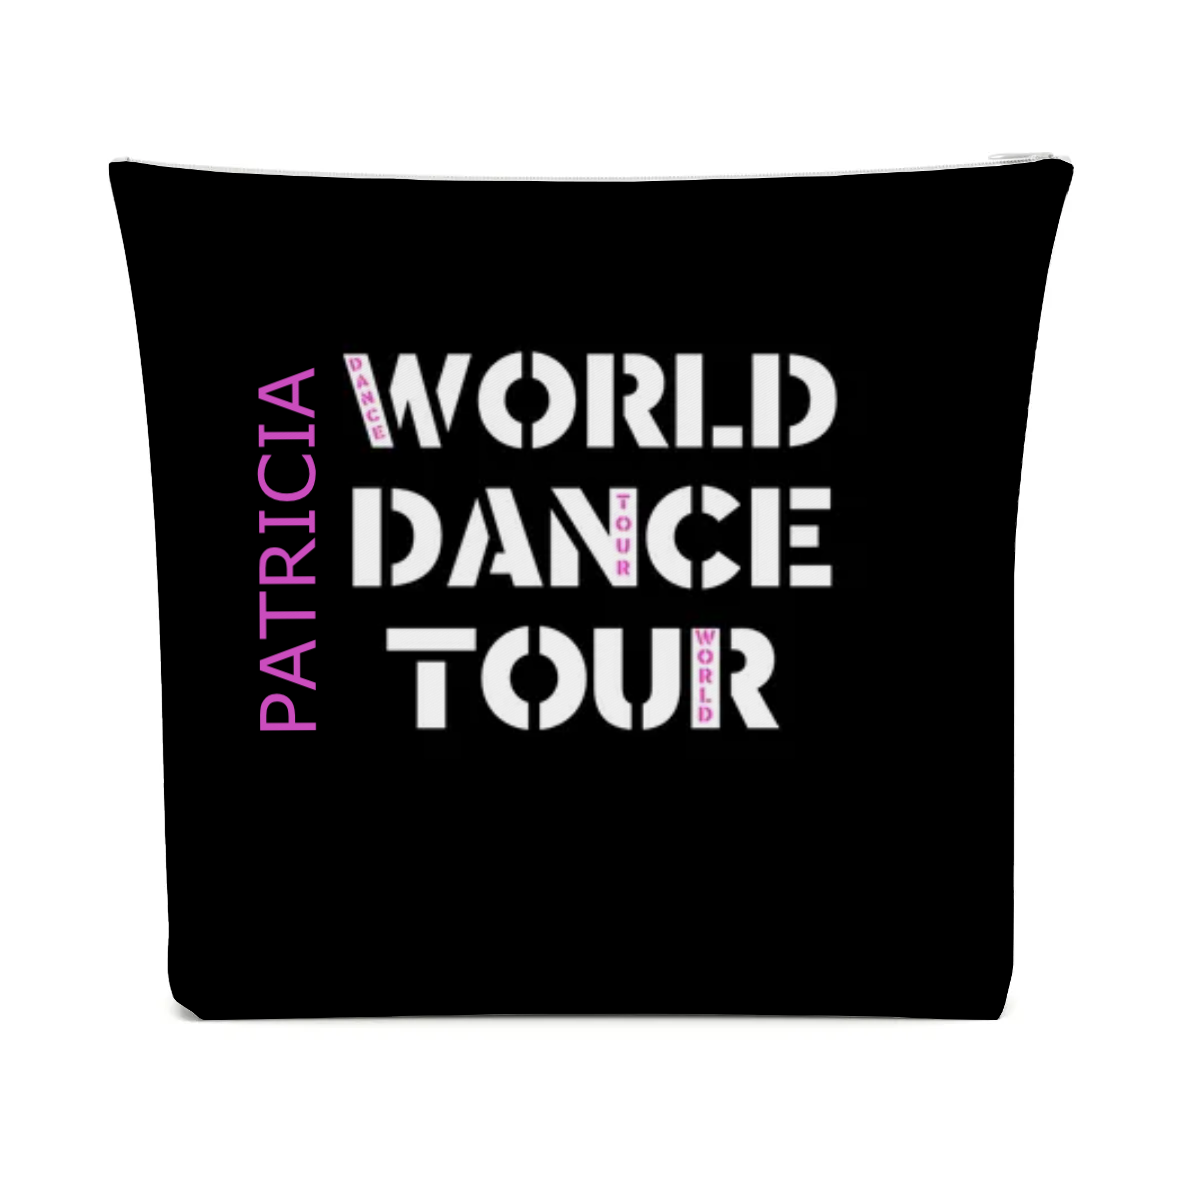 PERSONALIZED WORLD DANCE TOUR Cotton Cosmetic Bag